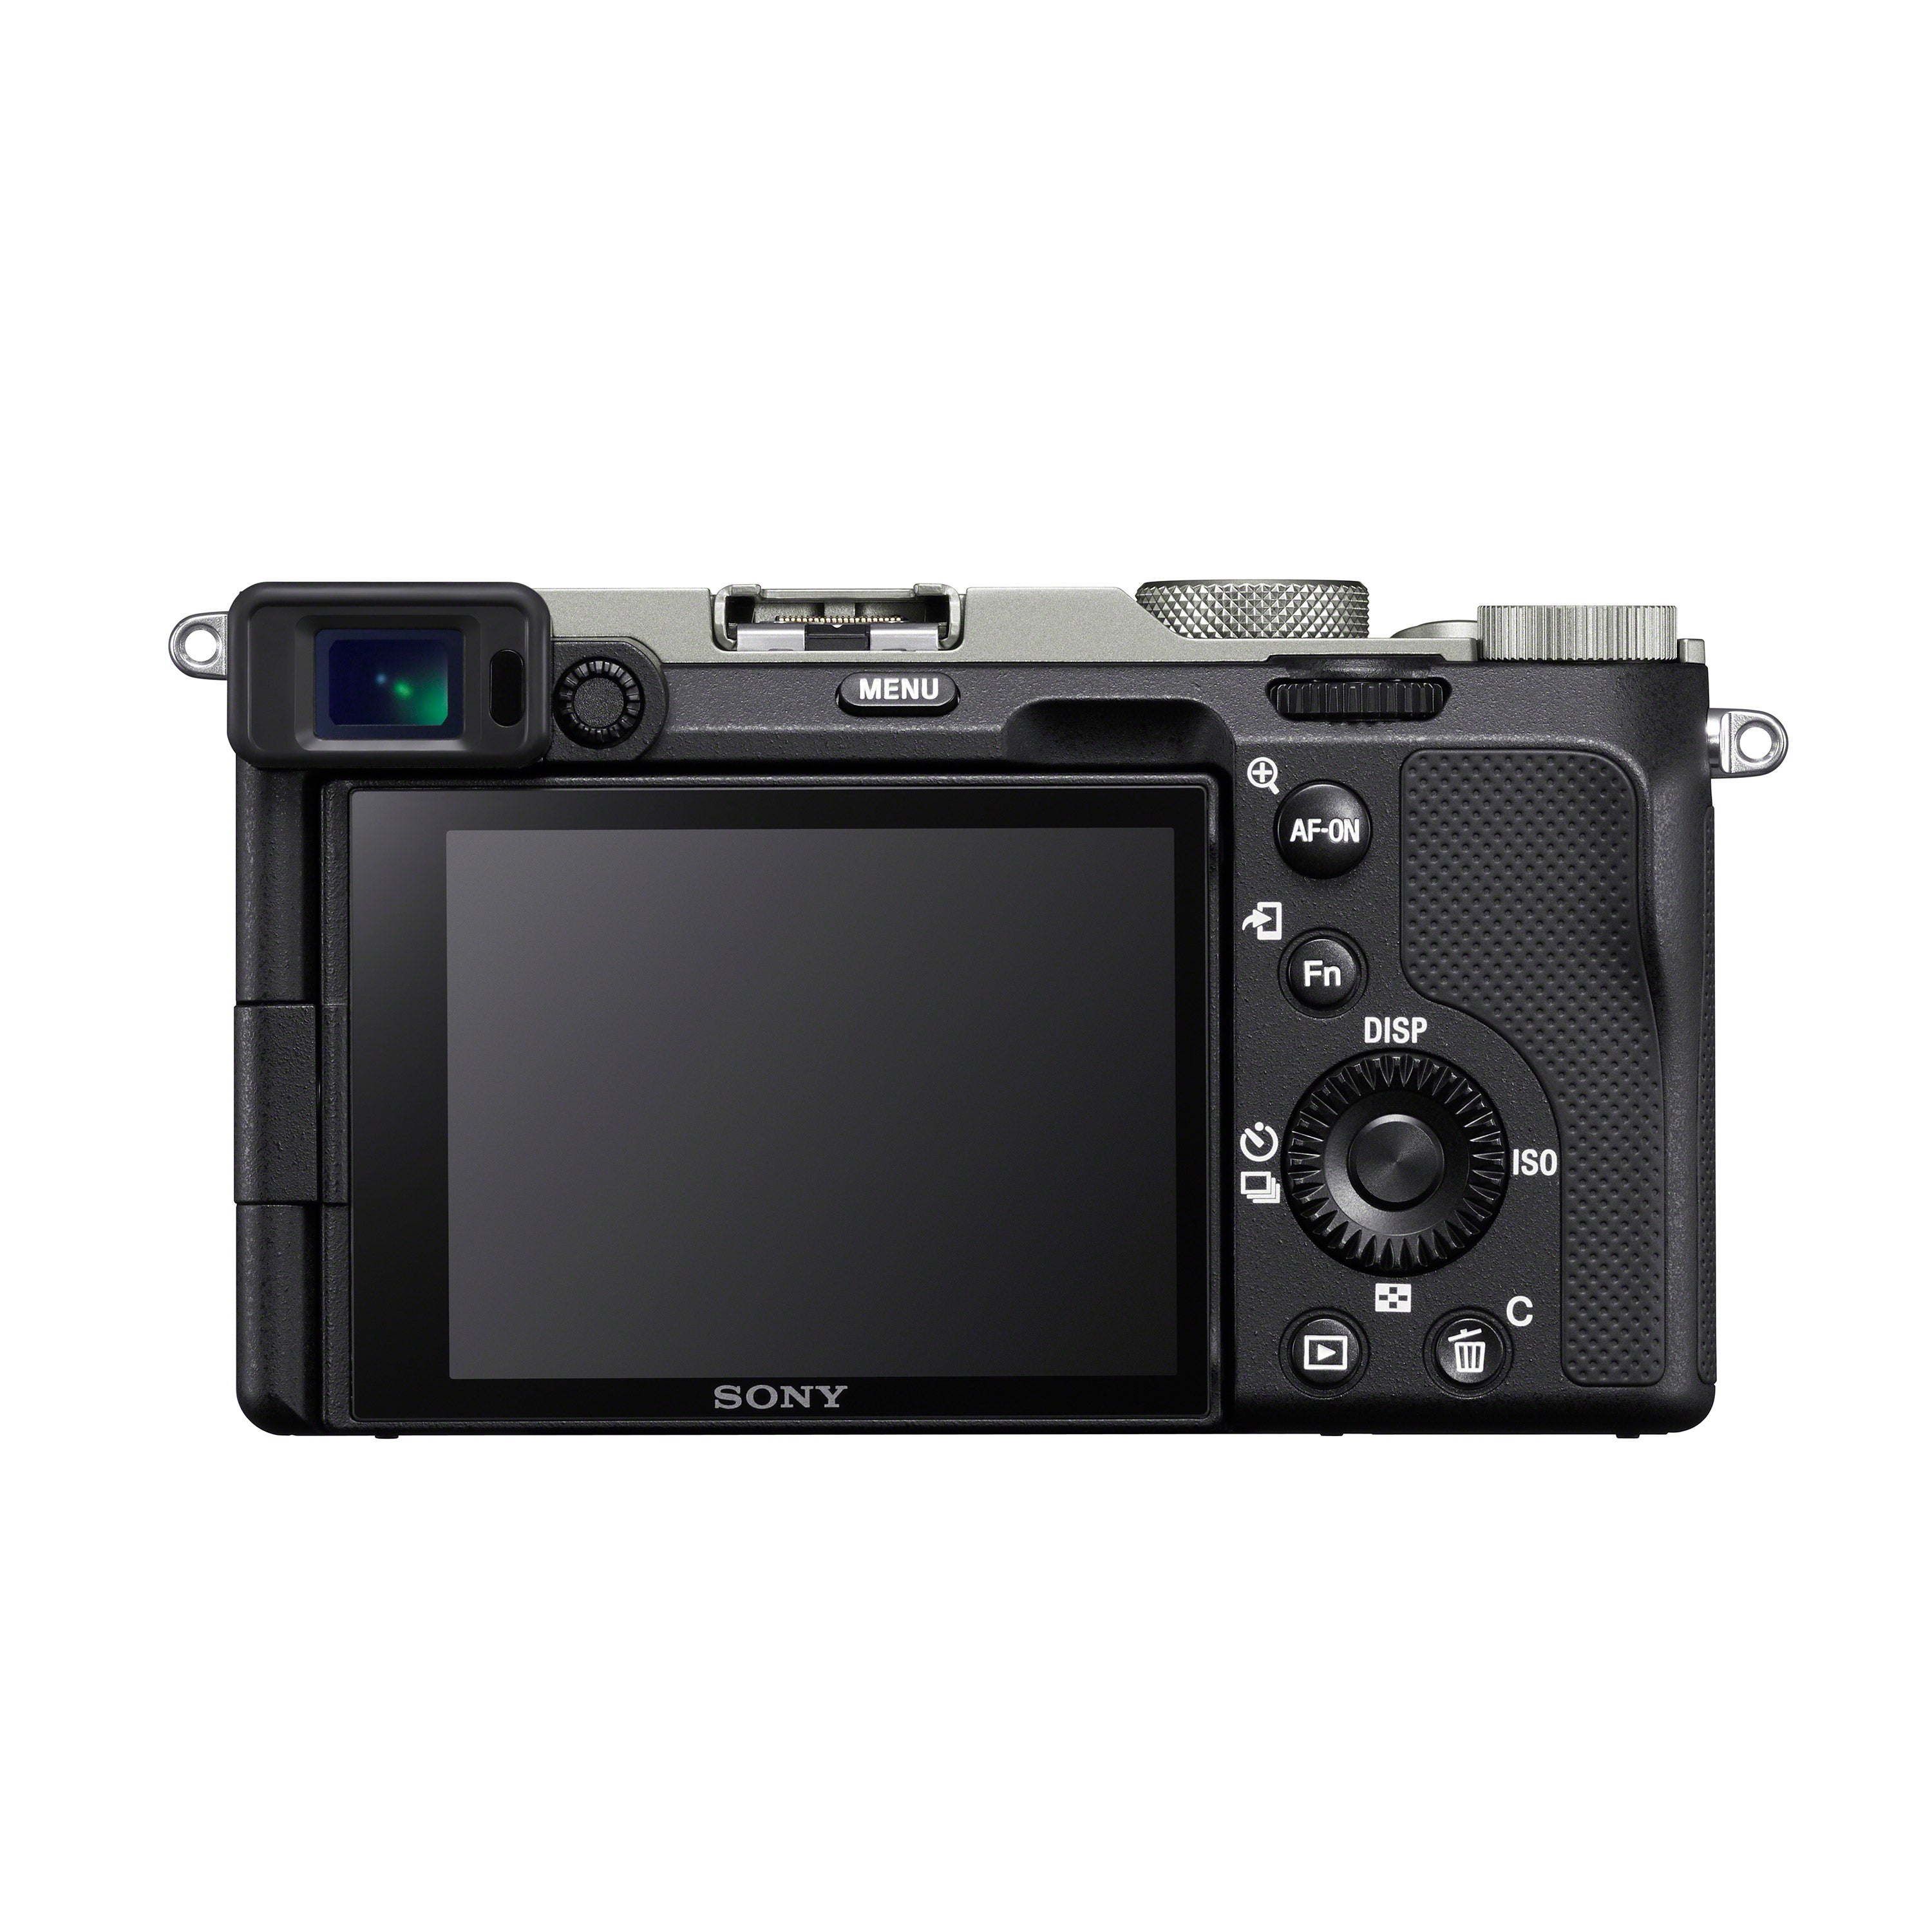 Sony a7C Compact full-frame camera (Silver)